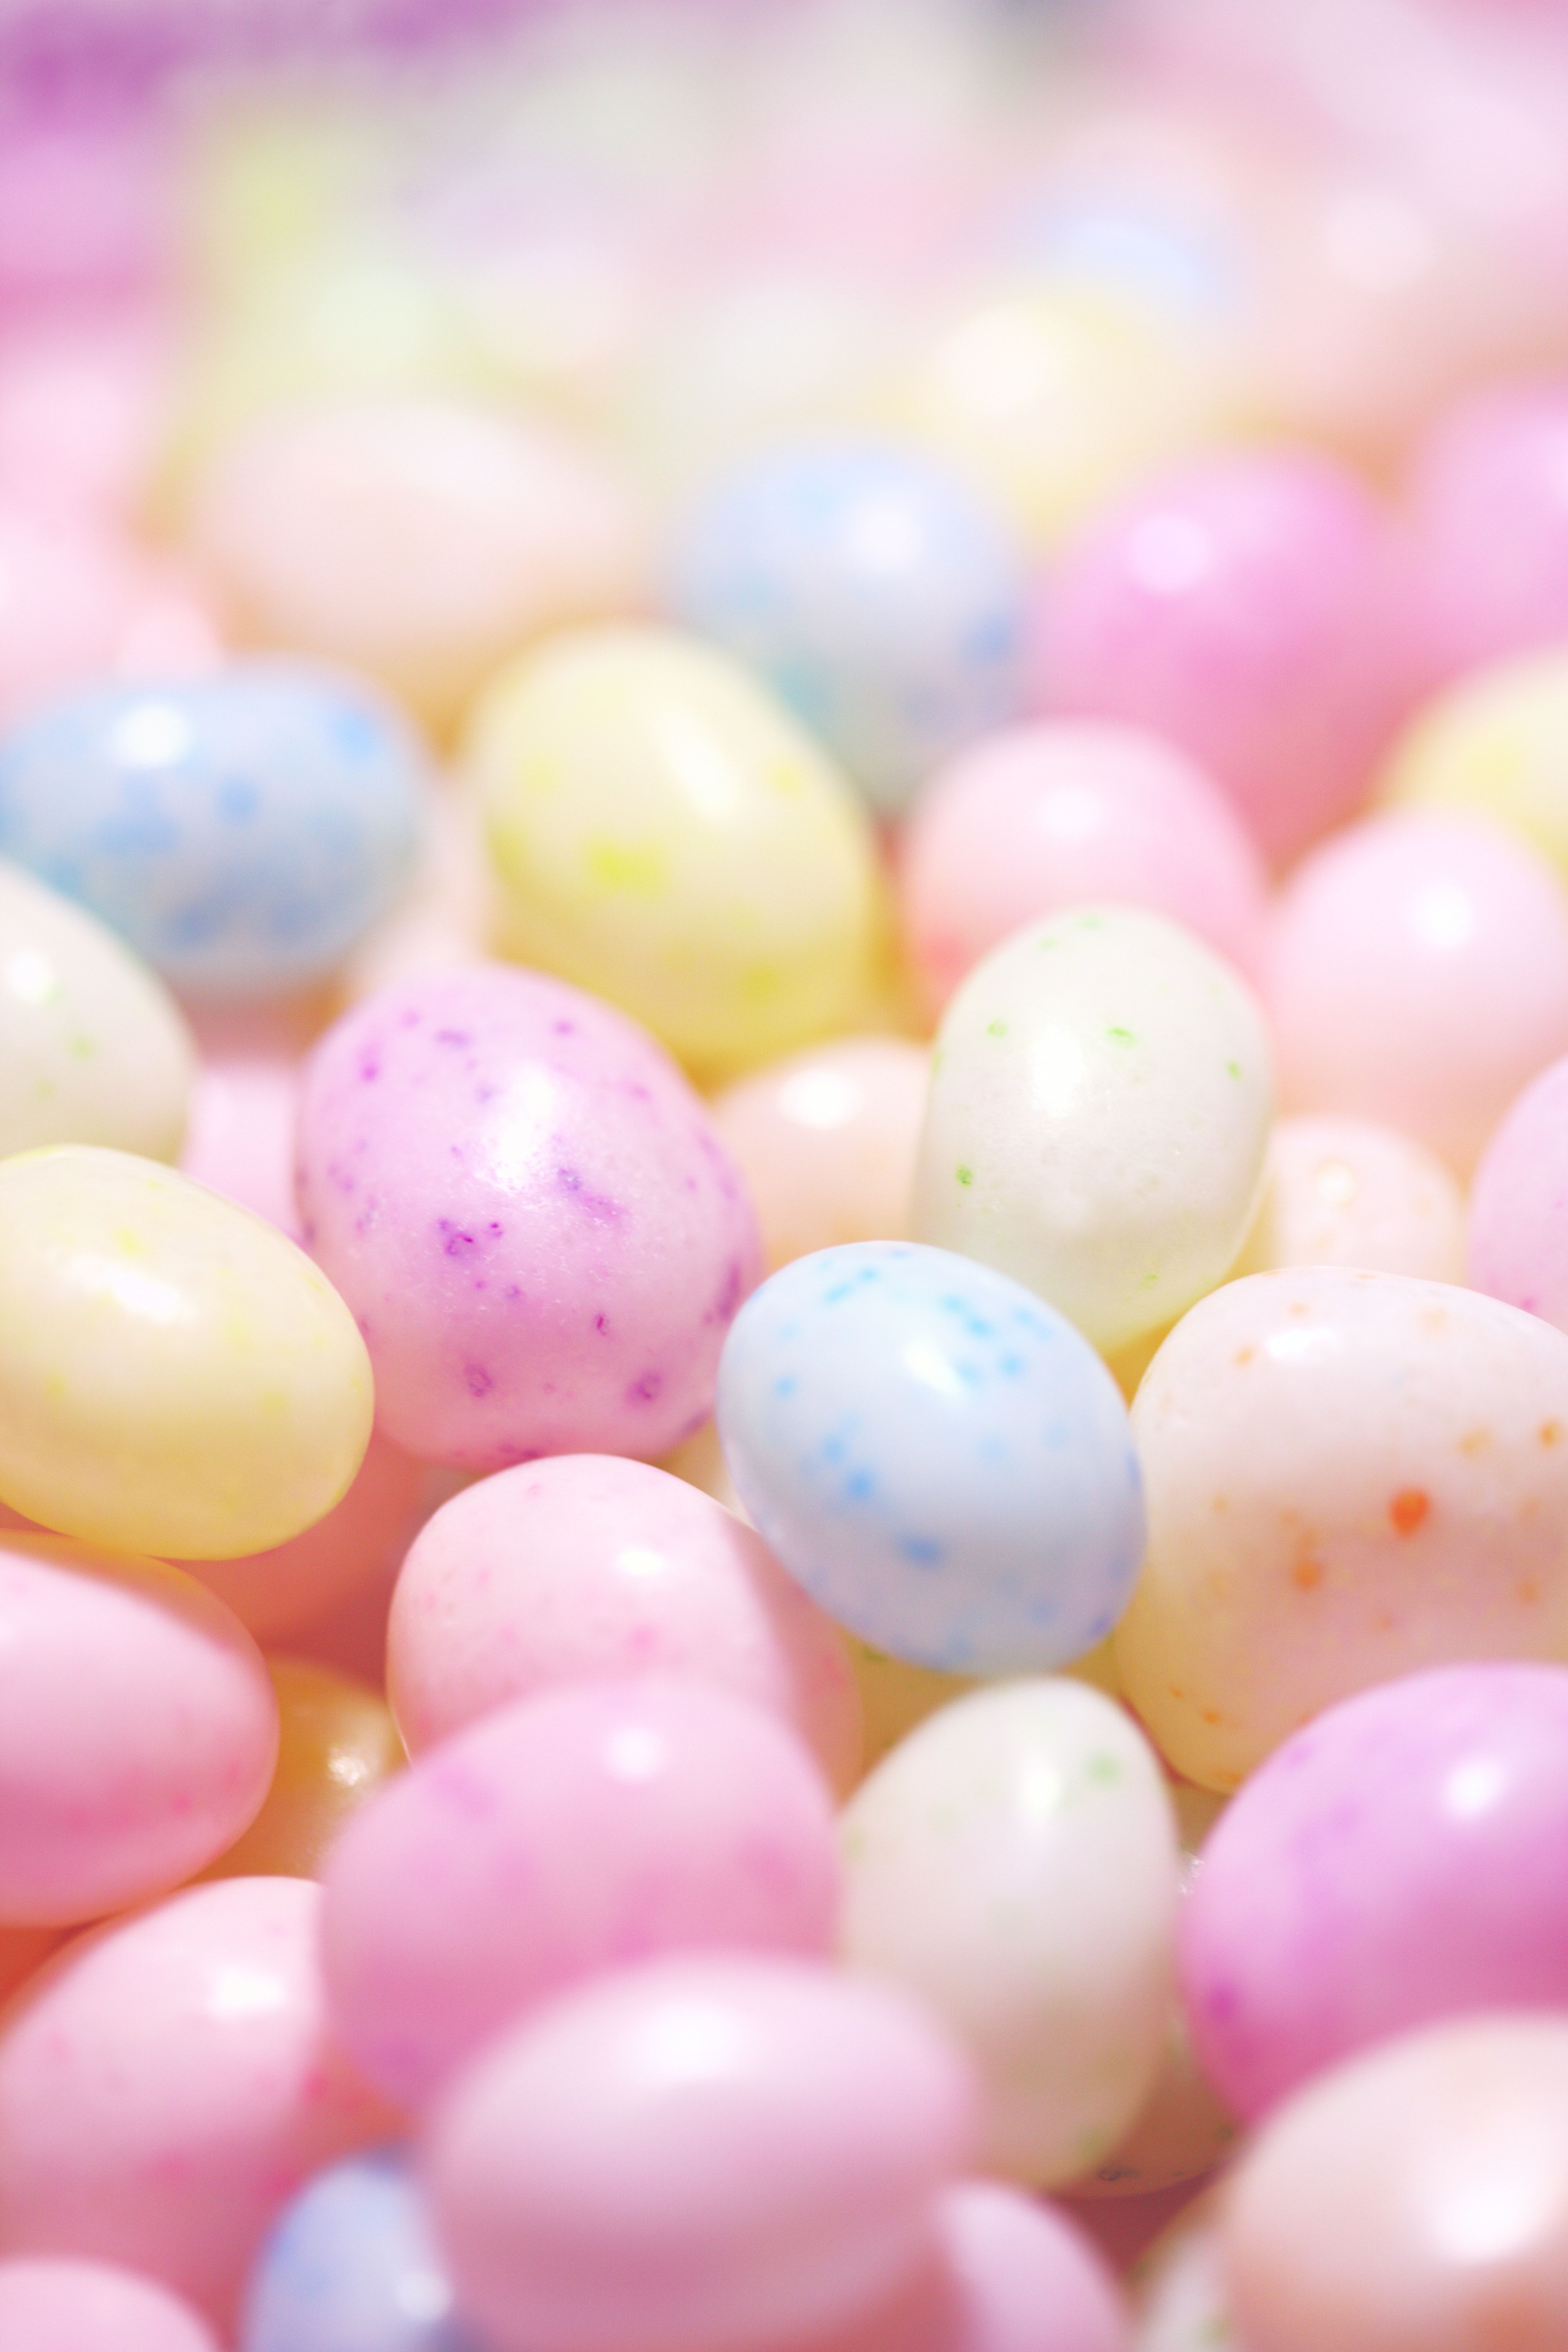 A close up of some colorful candy - Easter